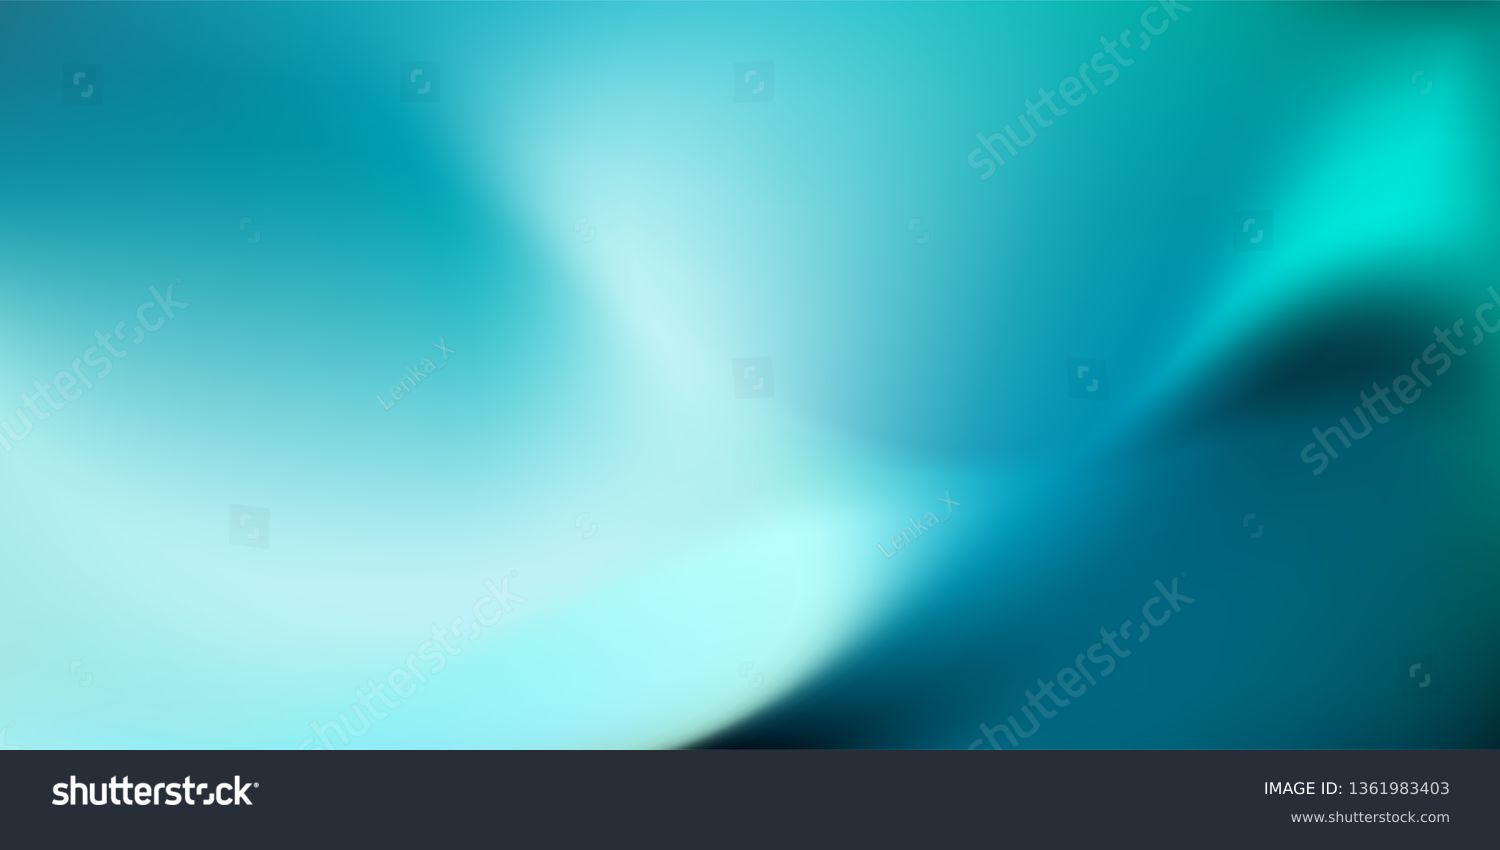 Abstract dark teal background with light wave. Blurred turquoise water backdrop. Vector illustration for your graphic design, banner, wallpaper or poster #1361983403